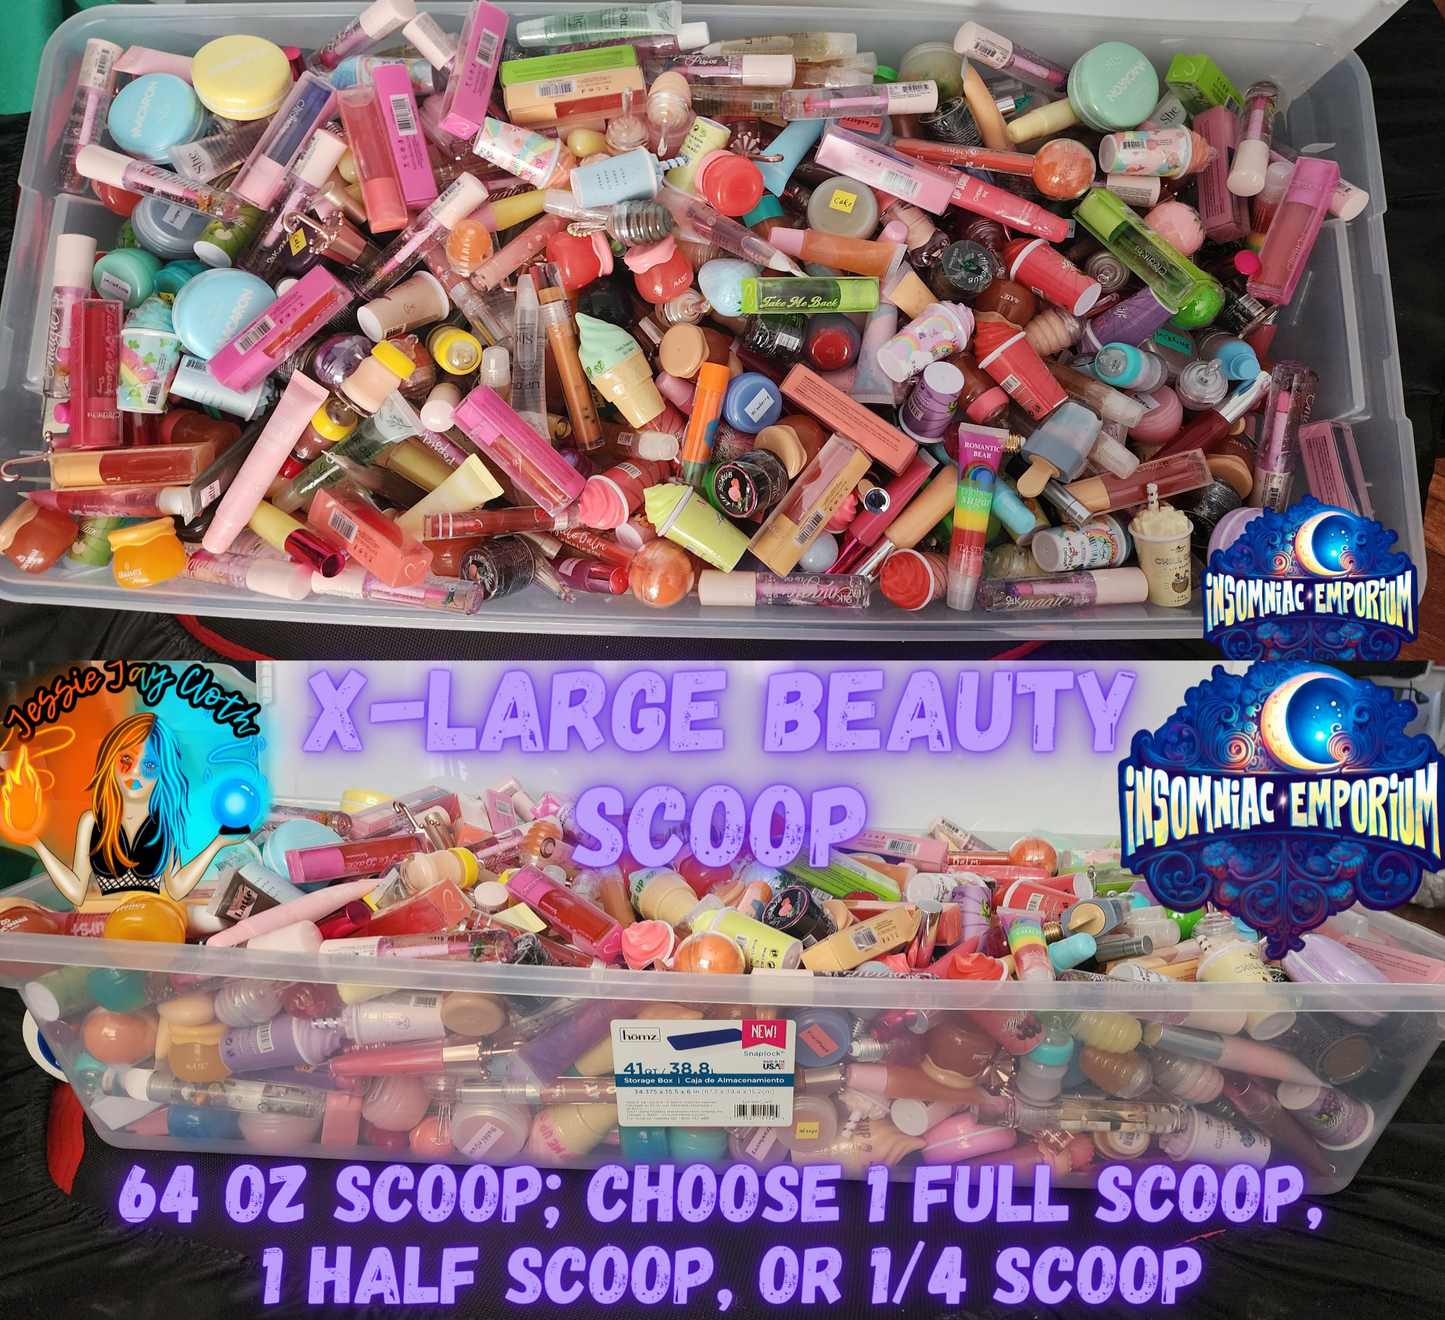 Recorded Spin to win prizes | Mystery Gifts, Beauty Bin |Slime, Bath bomb, Shower steamer | Add on | Surprise gum ball prizes!